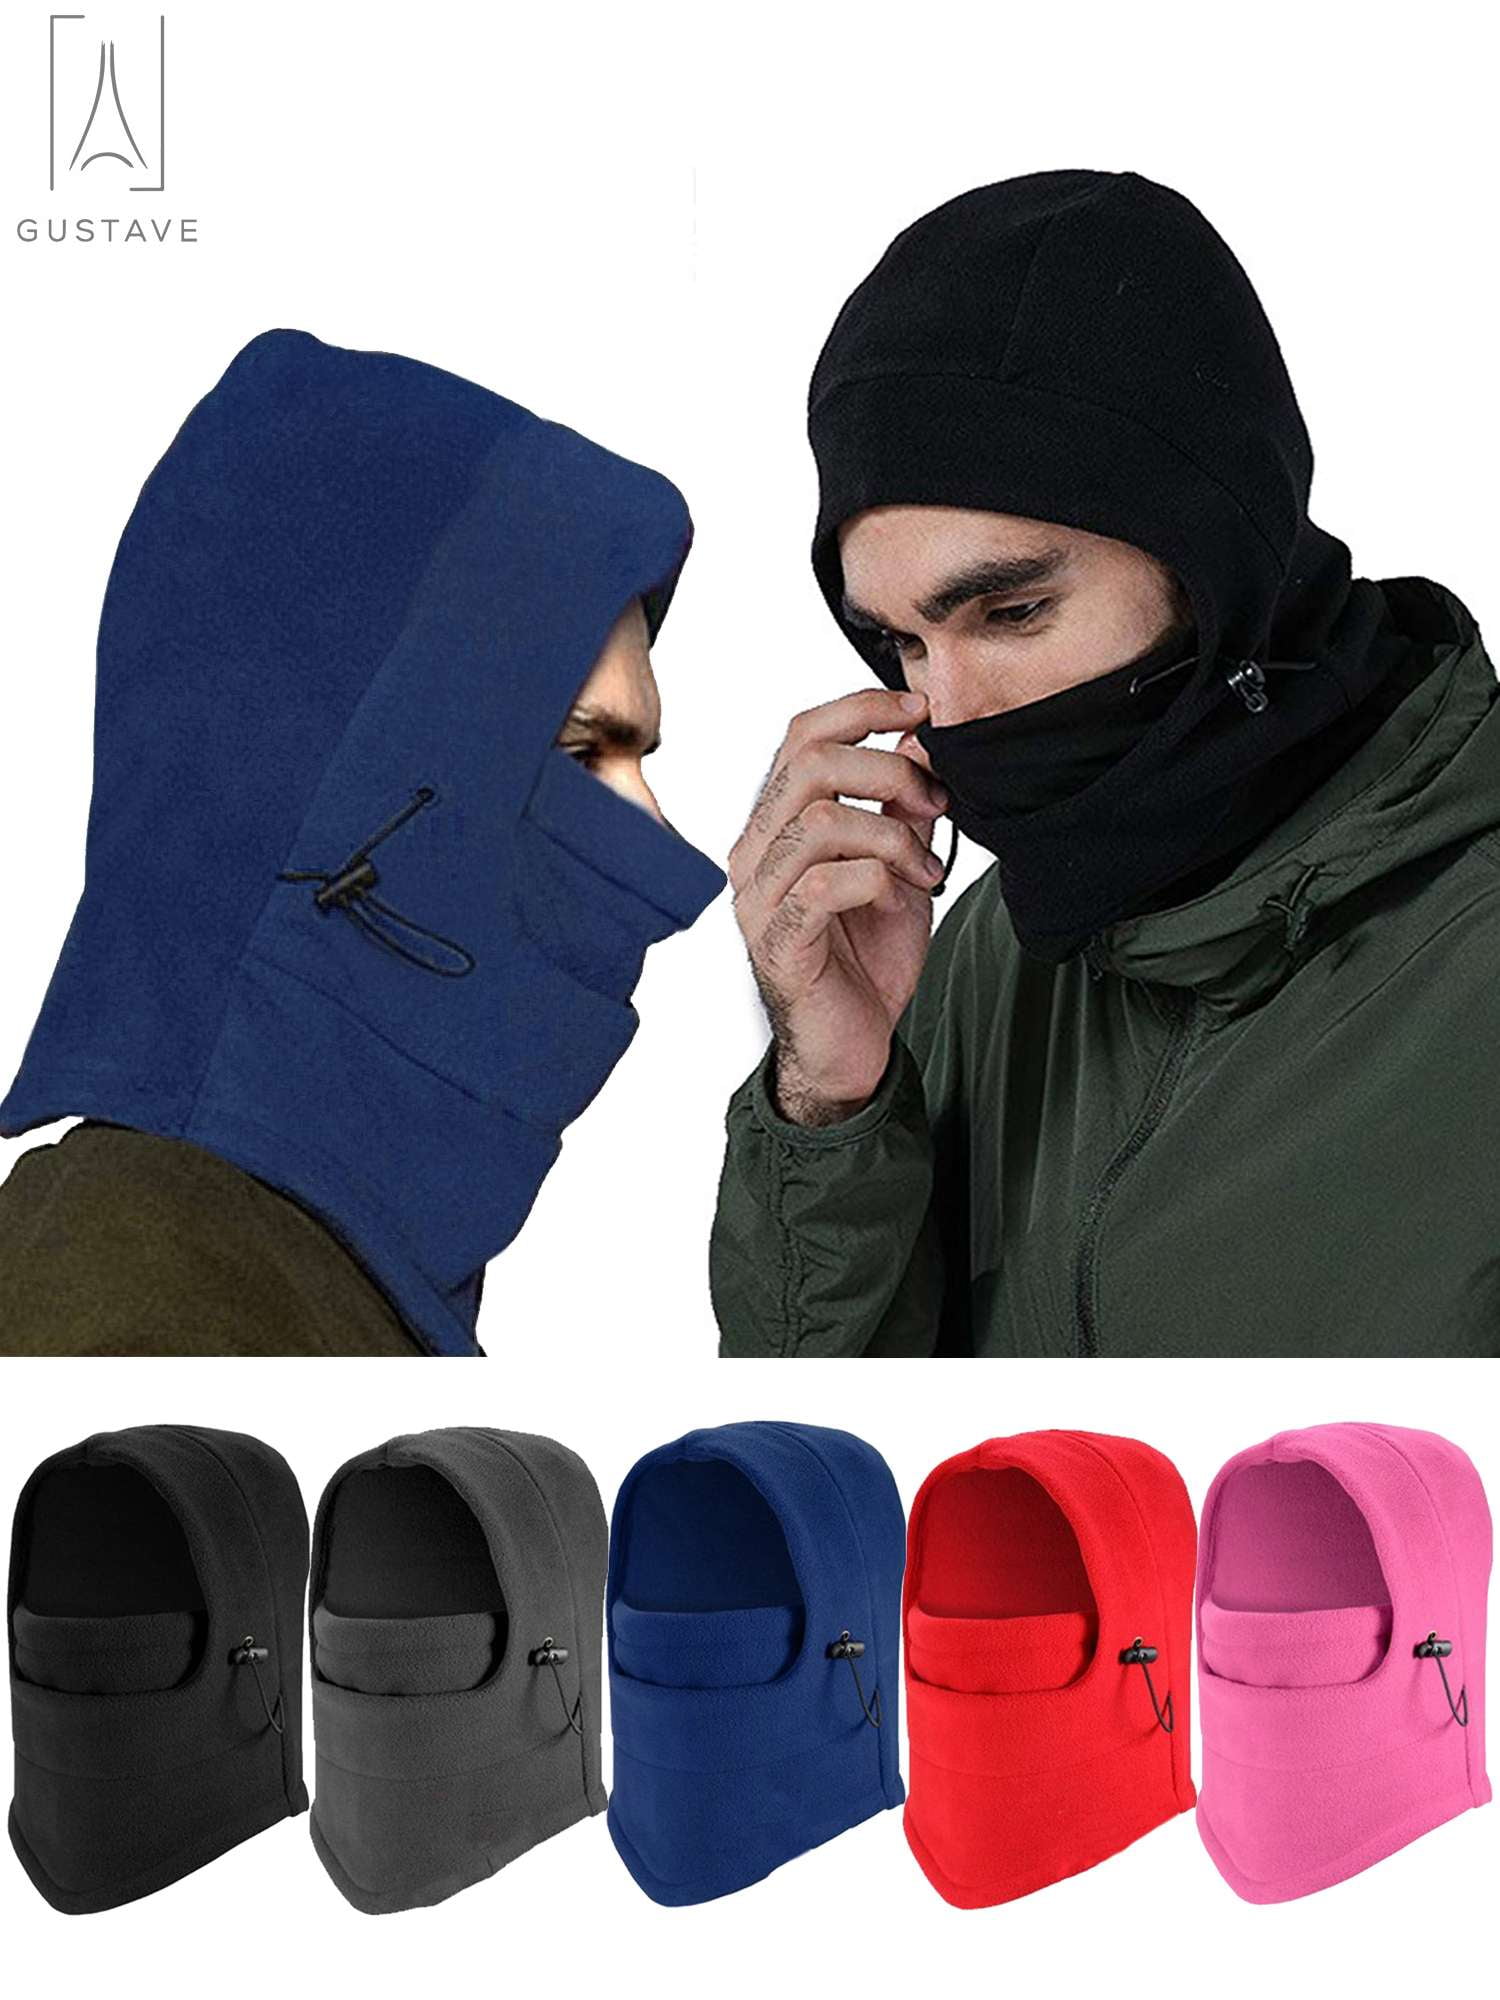 Herrnalise Distressed Balaclava Ski Mask for Men and Women - Knitted  Balaclava Distressed Windproof Shiesty Full Face Mask Cold Weather Black 